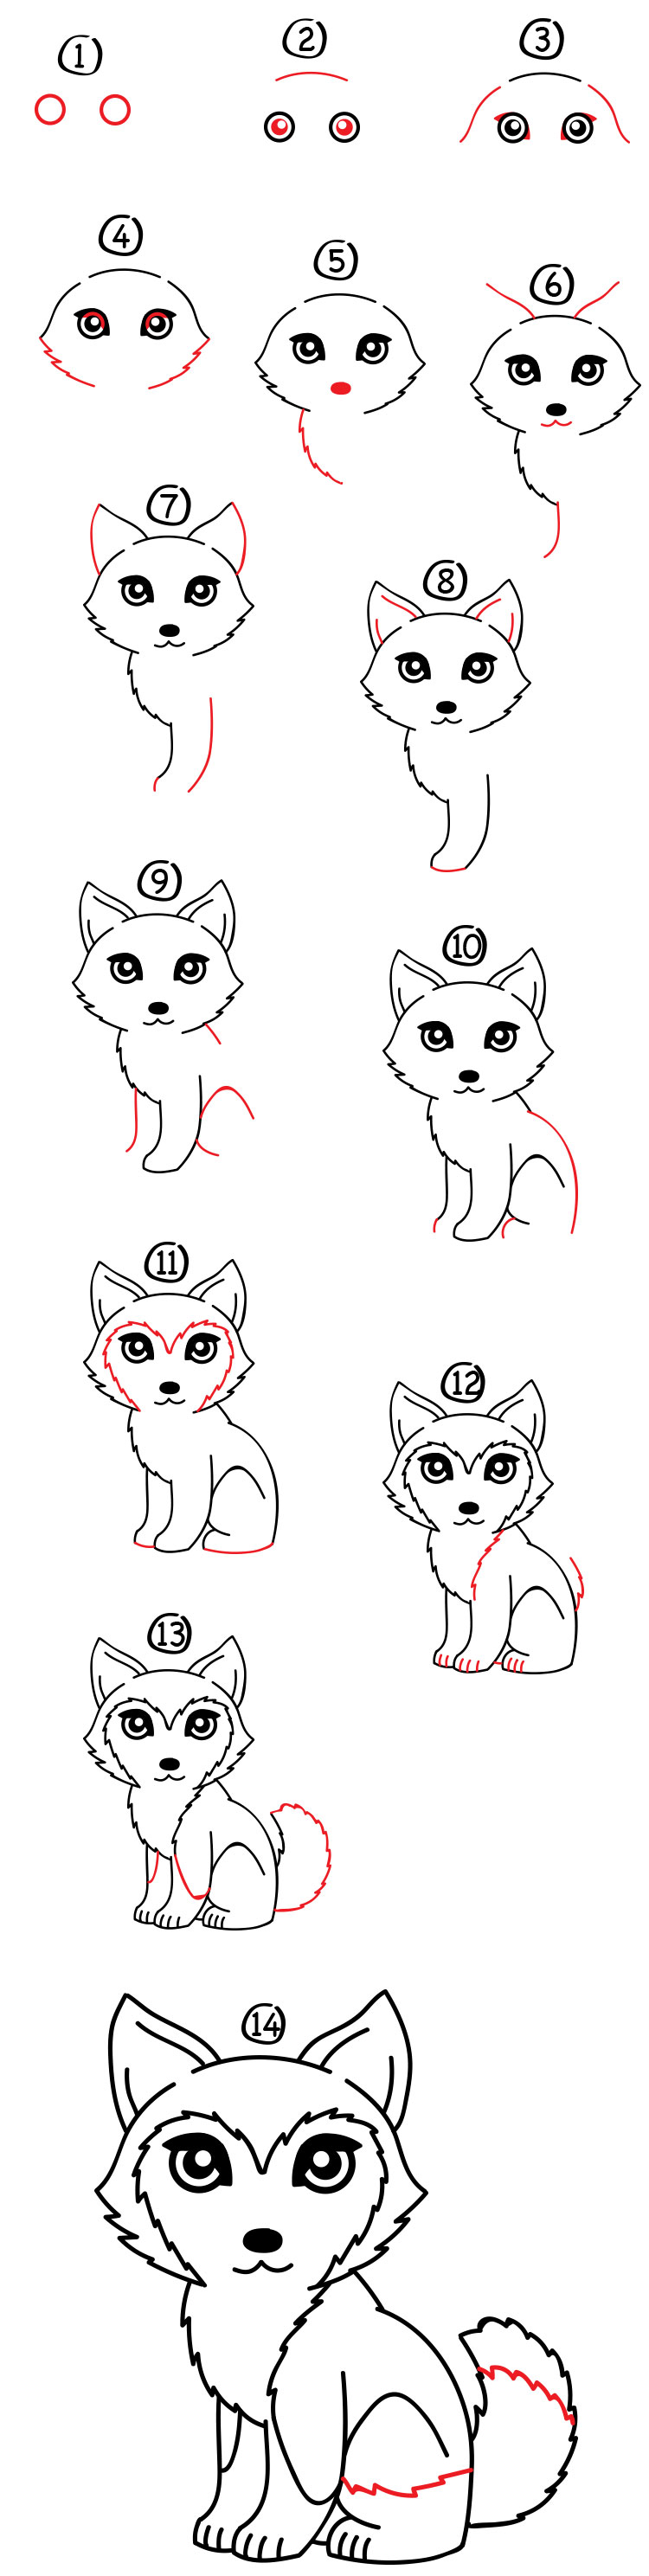 How To Draw A Husky Puppy Step By Step - cuteanimals